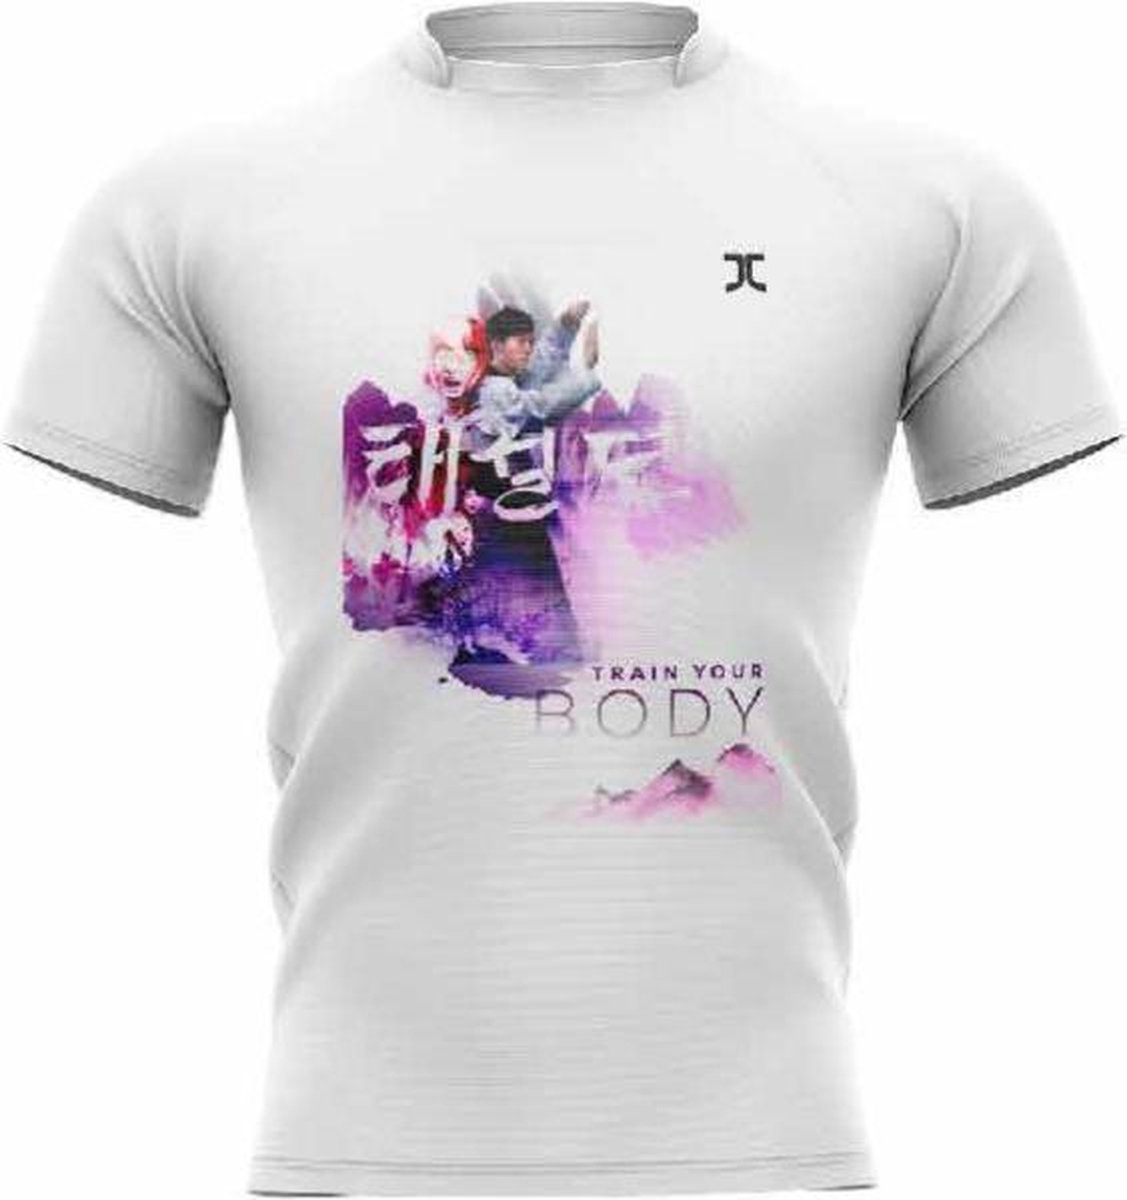 JCalicu Trainingshirt JC Taekwondo Train your Body | wit-paars - Product Kleur: Wit Paars / Product Maat: 6/8 140/160